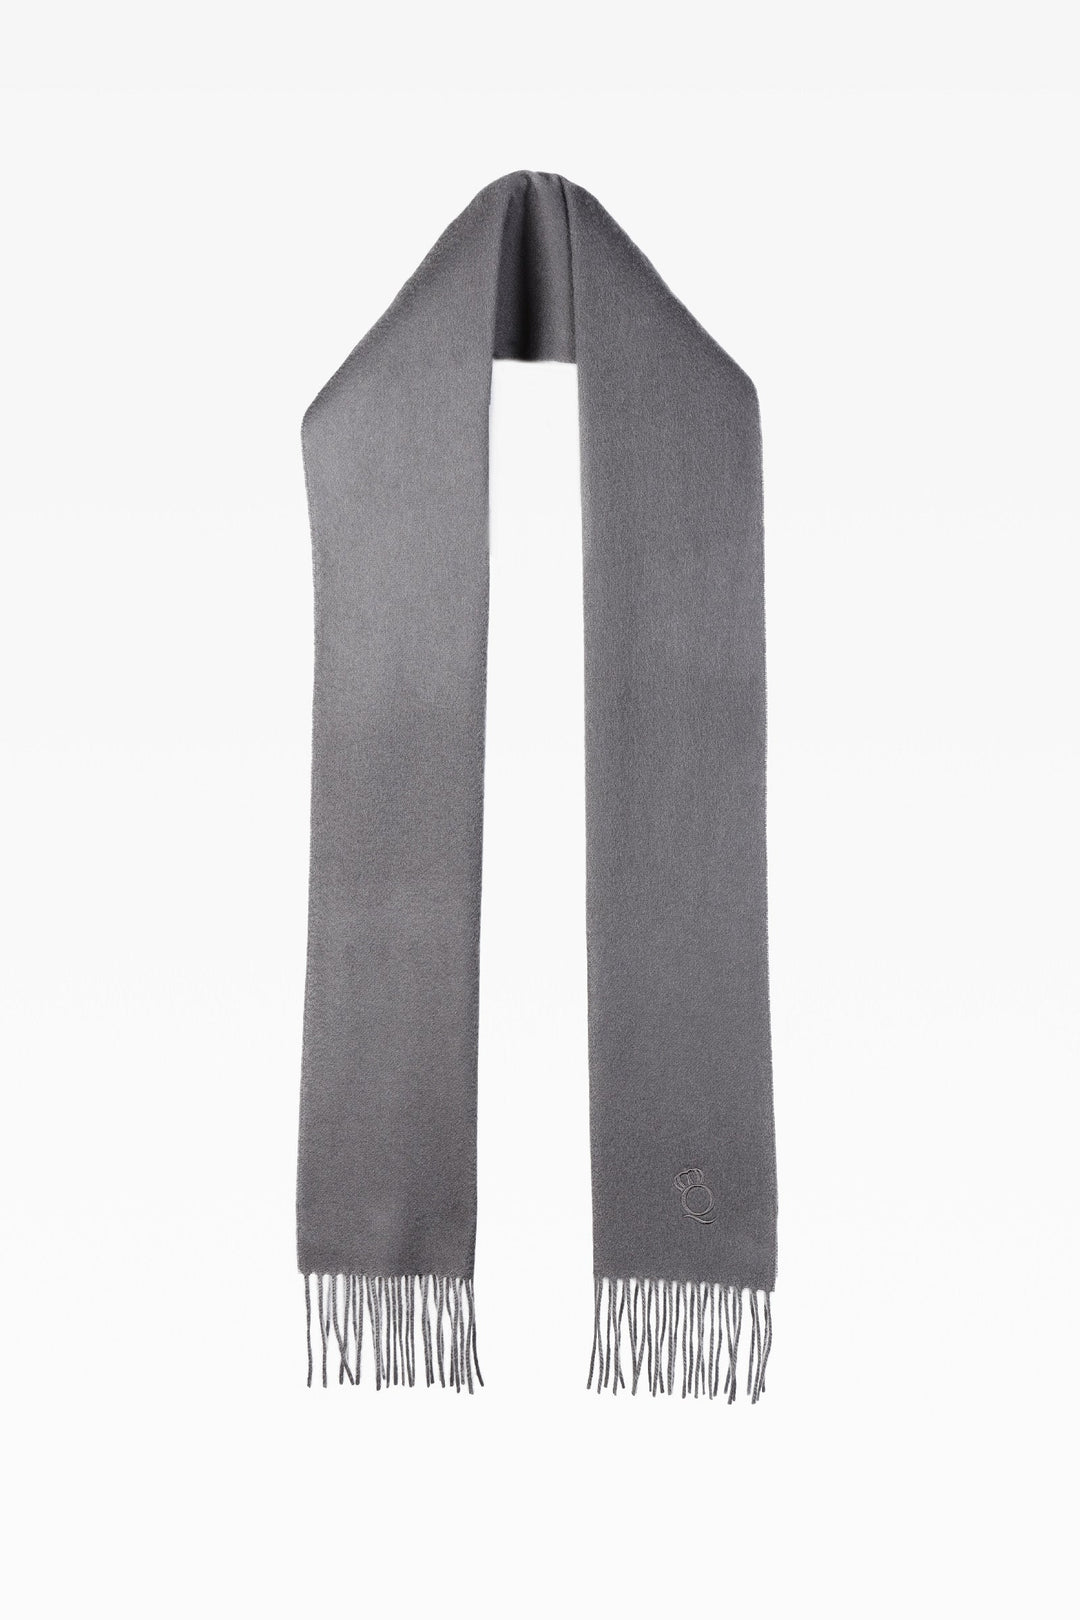 Baily Plain Charcoal Cashmere Scarf